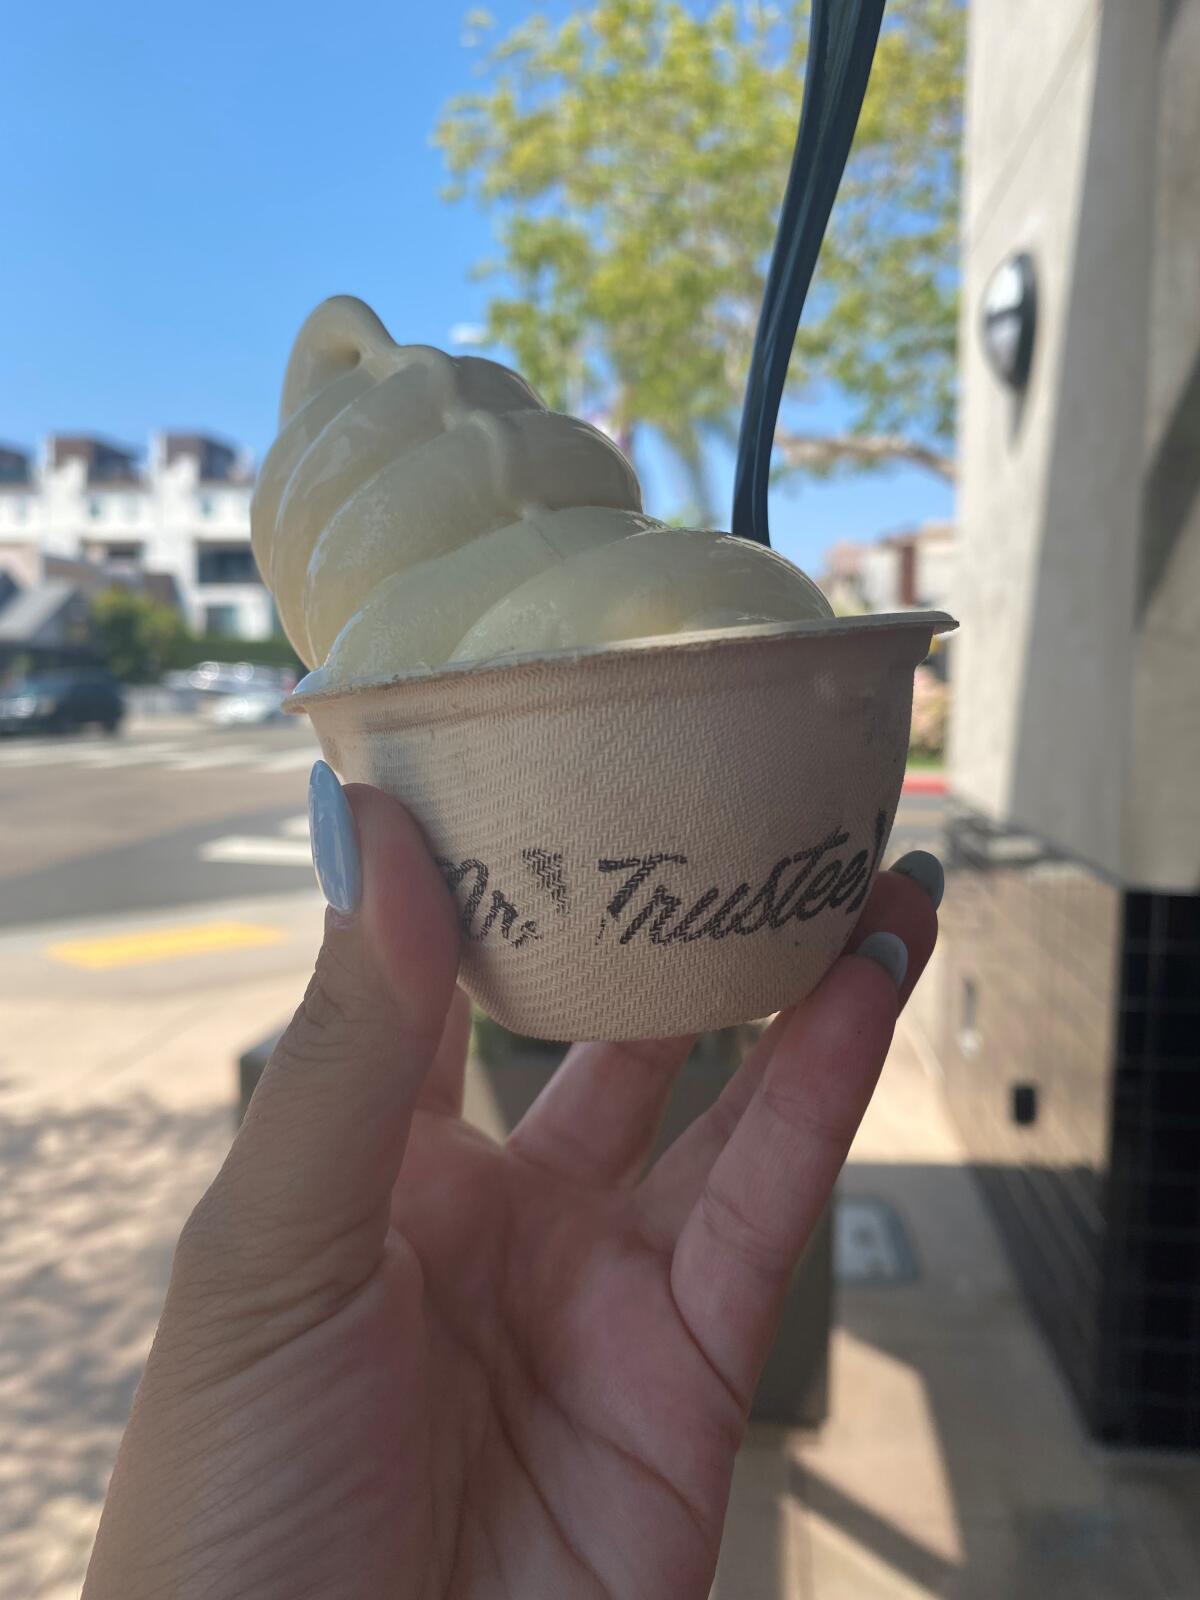 The Captain Crunch soft serve from Mr. Trustee Creamery. It has been rebranded to Wild Child.